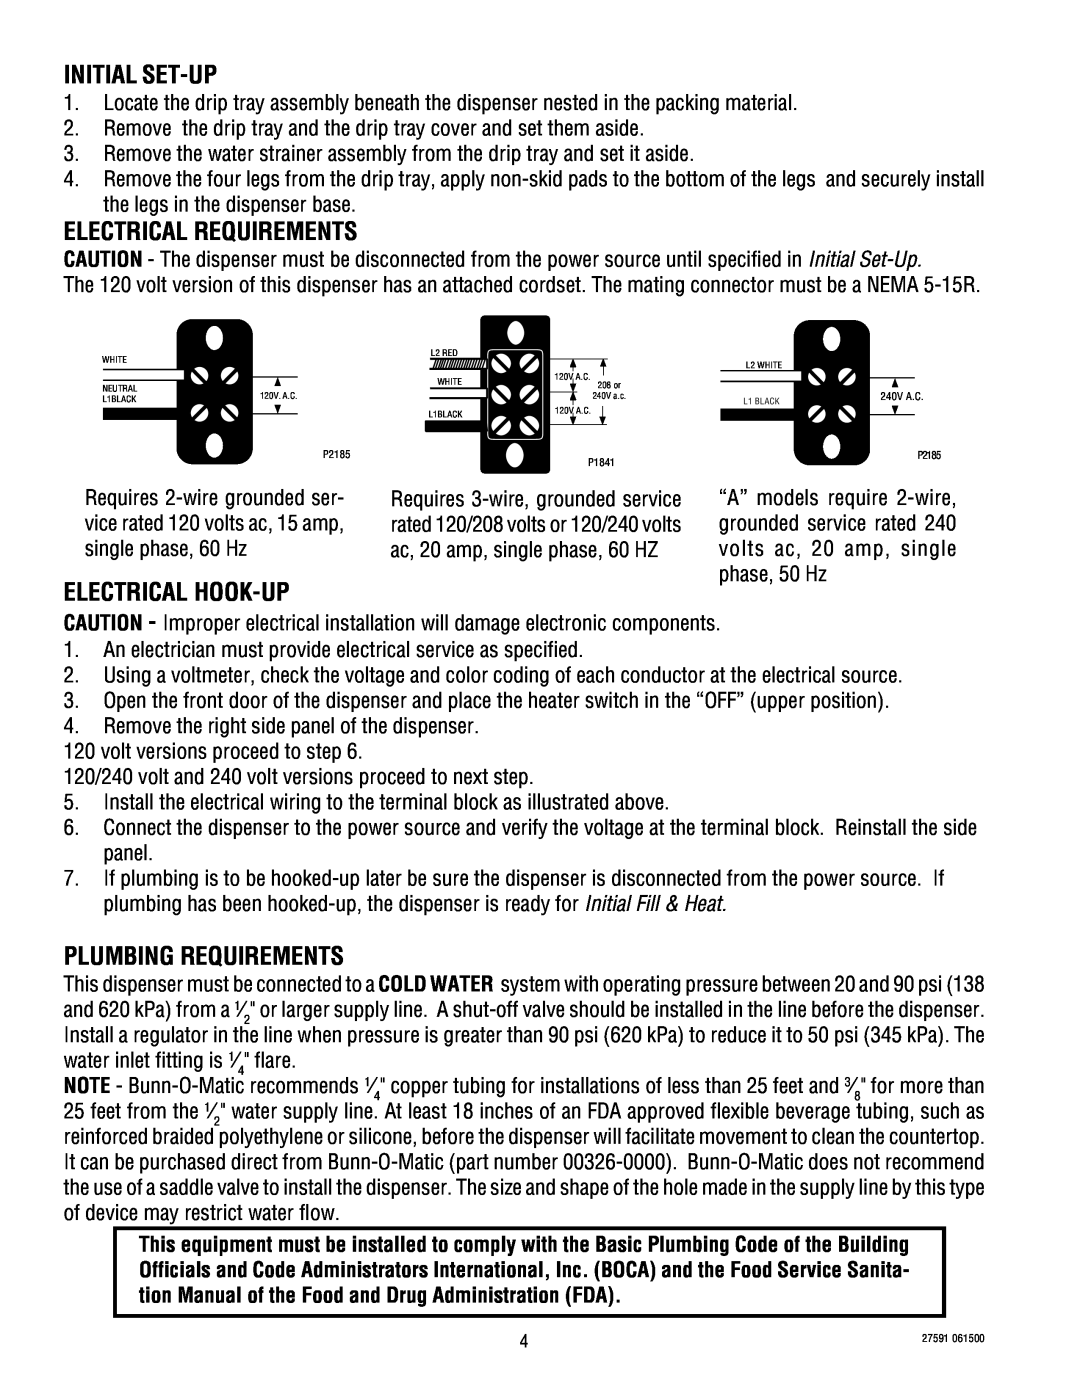 Bunn HC-2 HC-3 service manual Initial Set-Up, Electrical Requirements, Electrical Hook-Up, Plumbing Requirements 